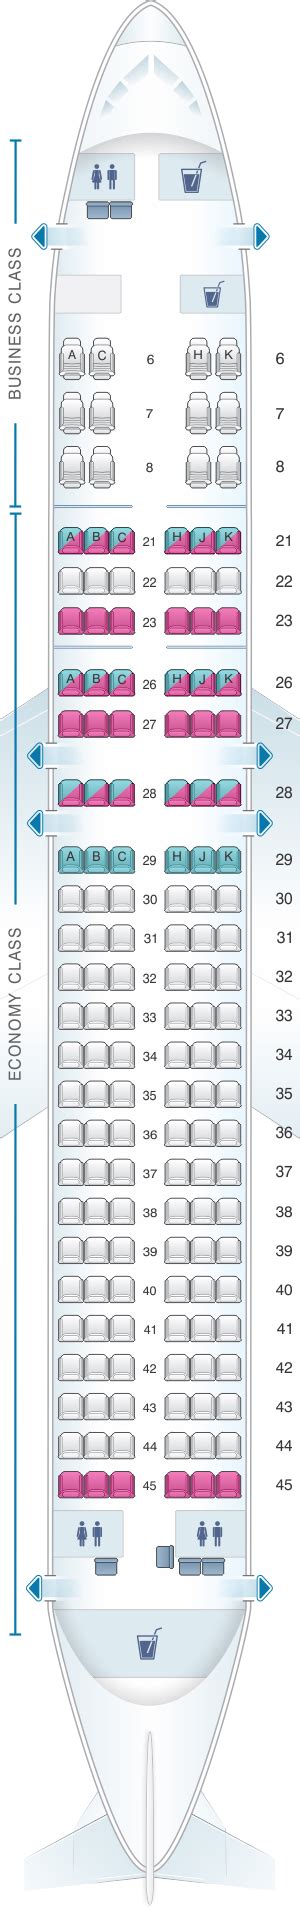 Seat Map Royal Brunei Airlines Airbus A320 Neo Seatmaestro